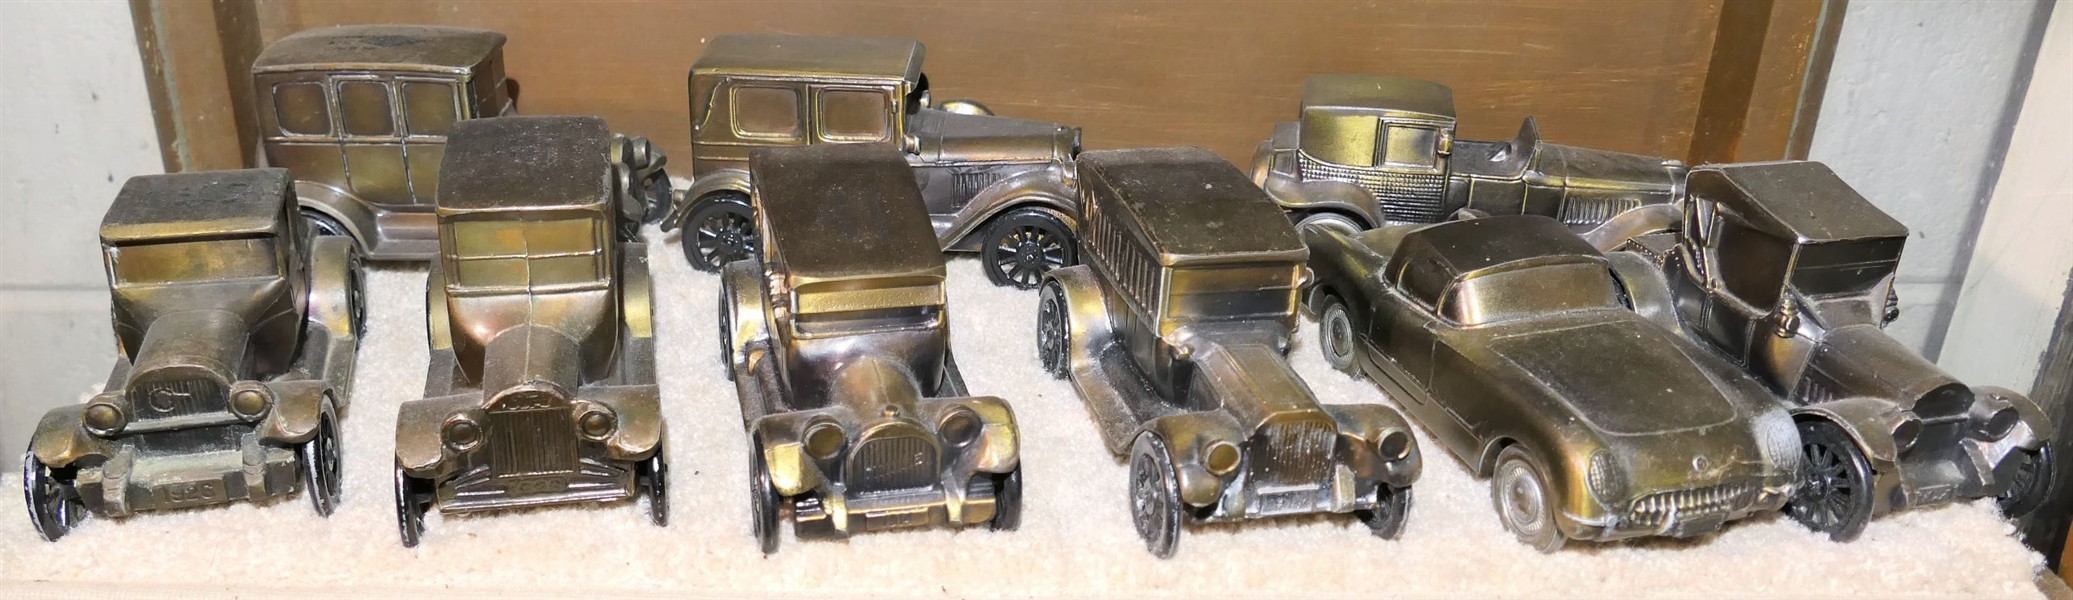 9 Metal Car Banks - Several Advertising  - First National Bank. Farmers & Merchants, and Jersey Shore Bank - Banks Made by Banthrico